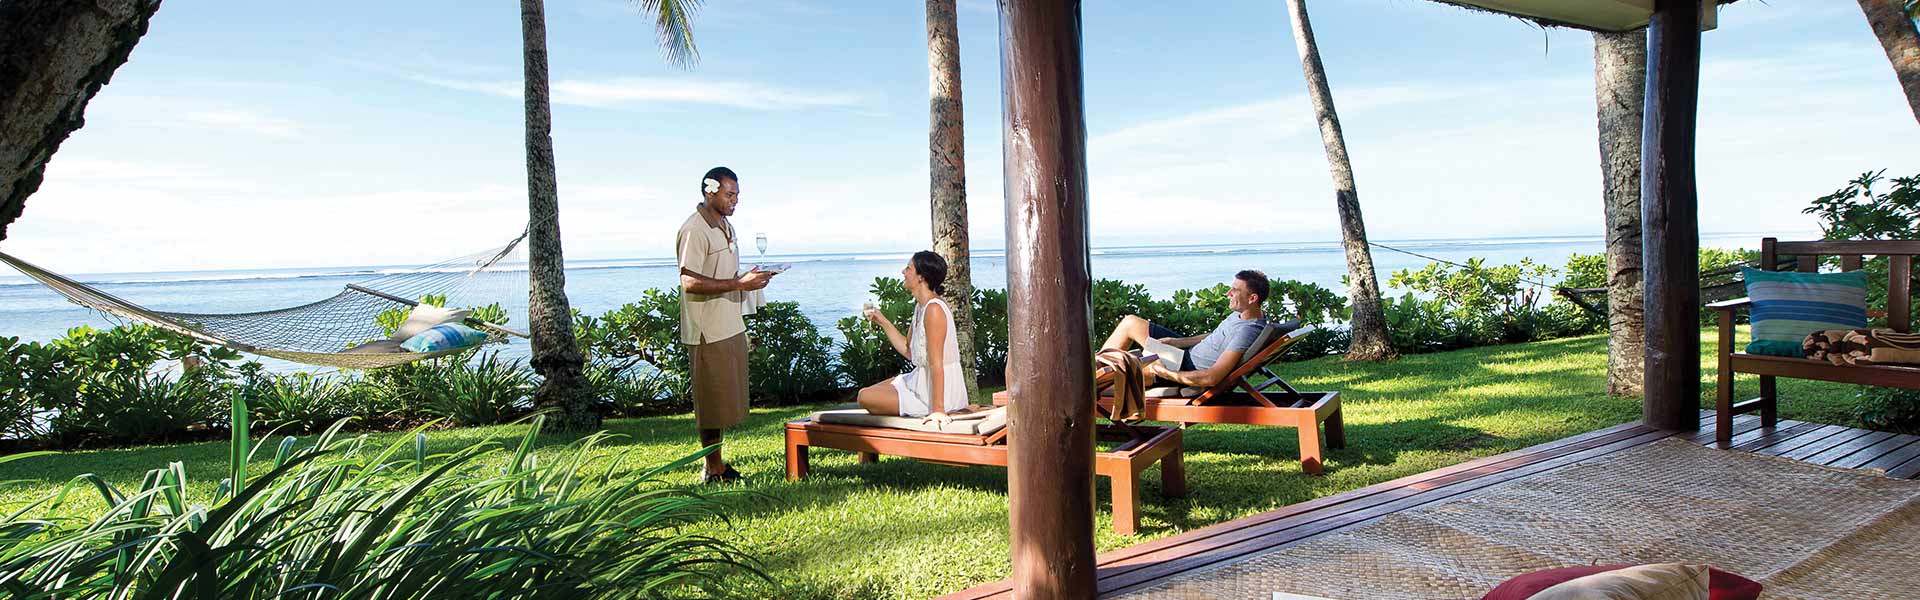 Renewal of Vows in Fiji – From $754!